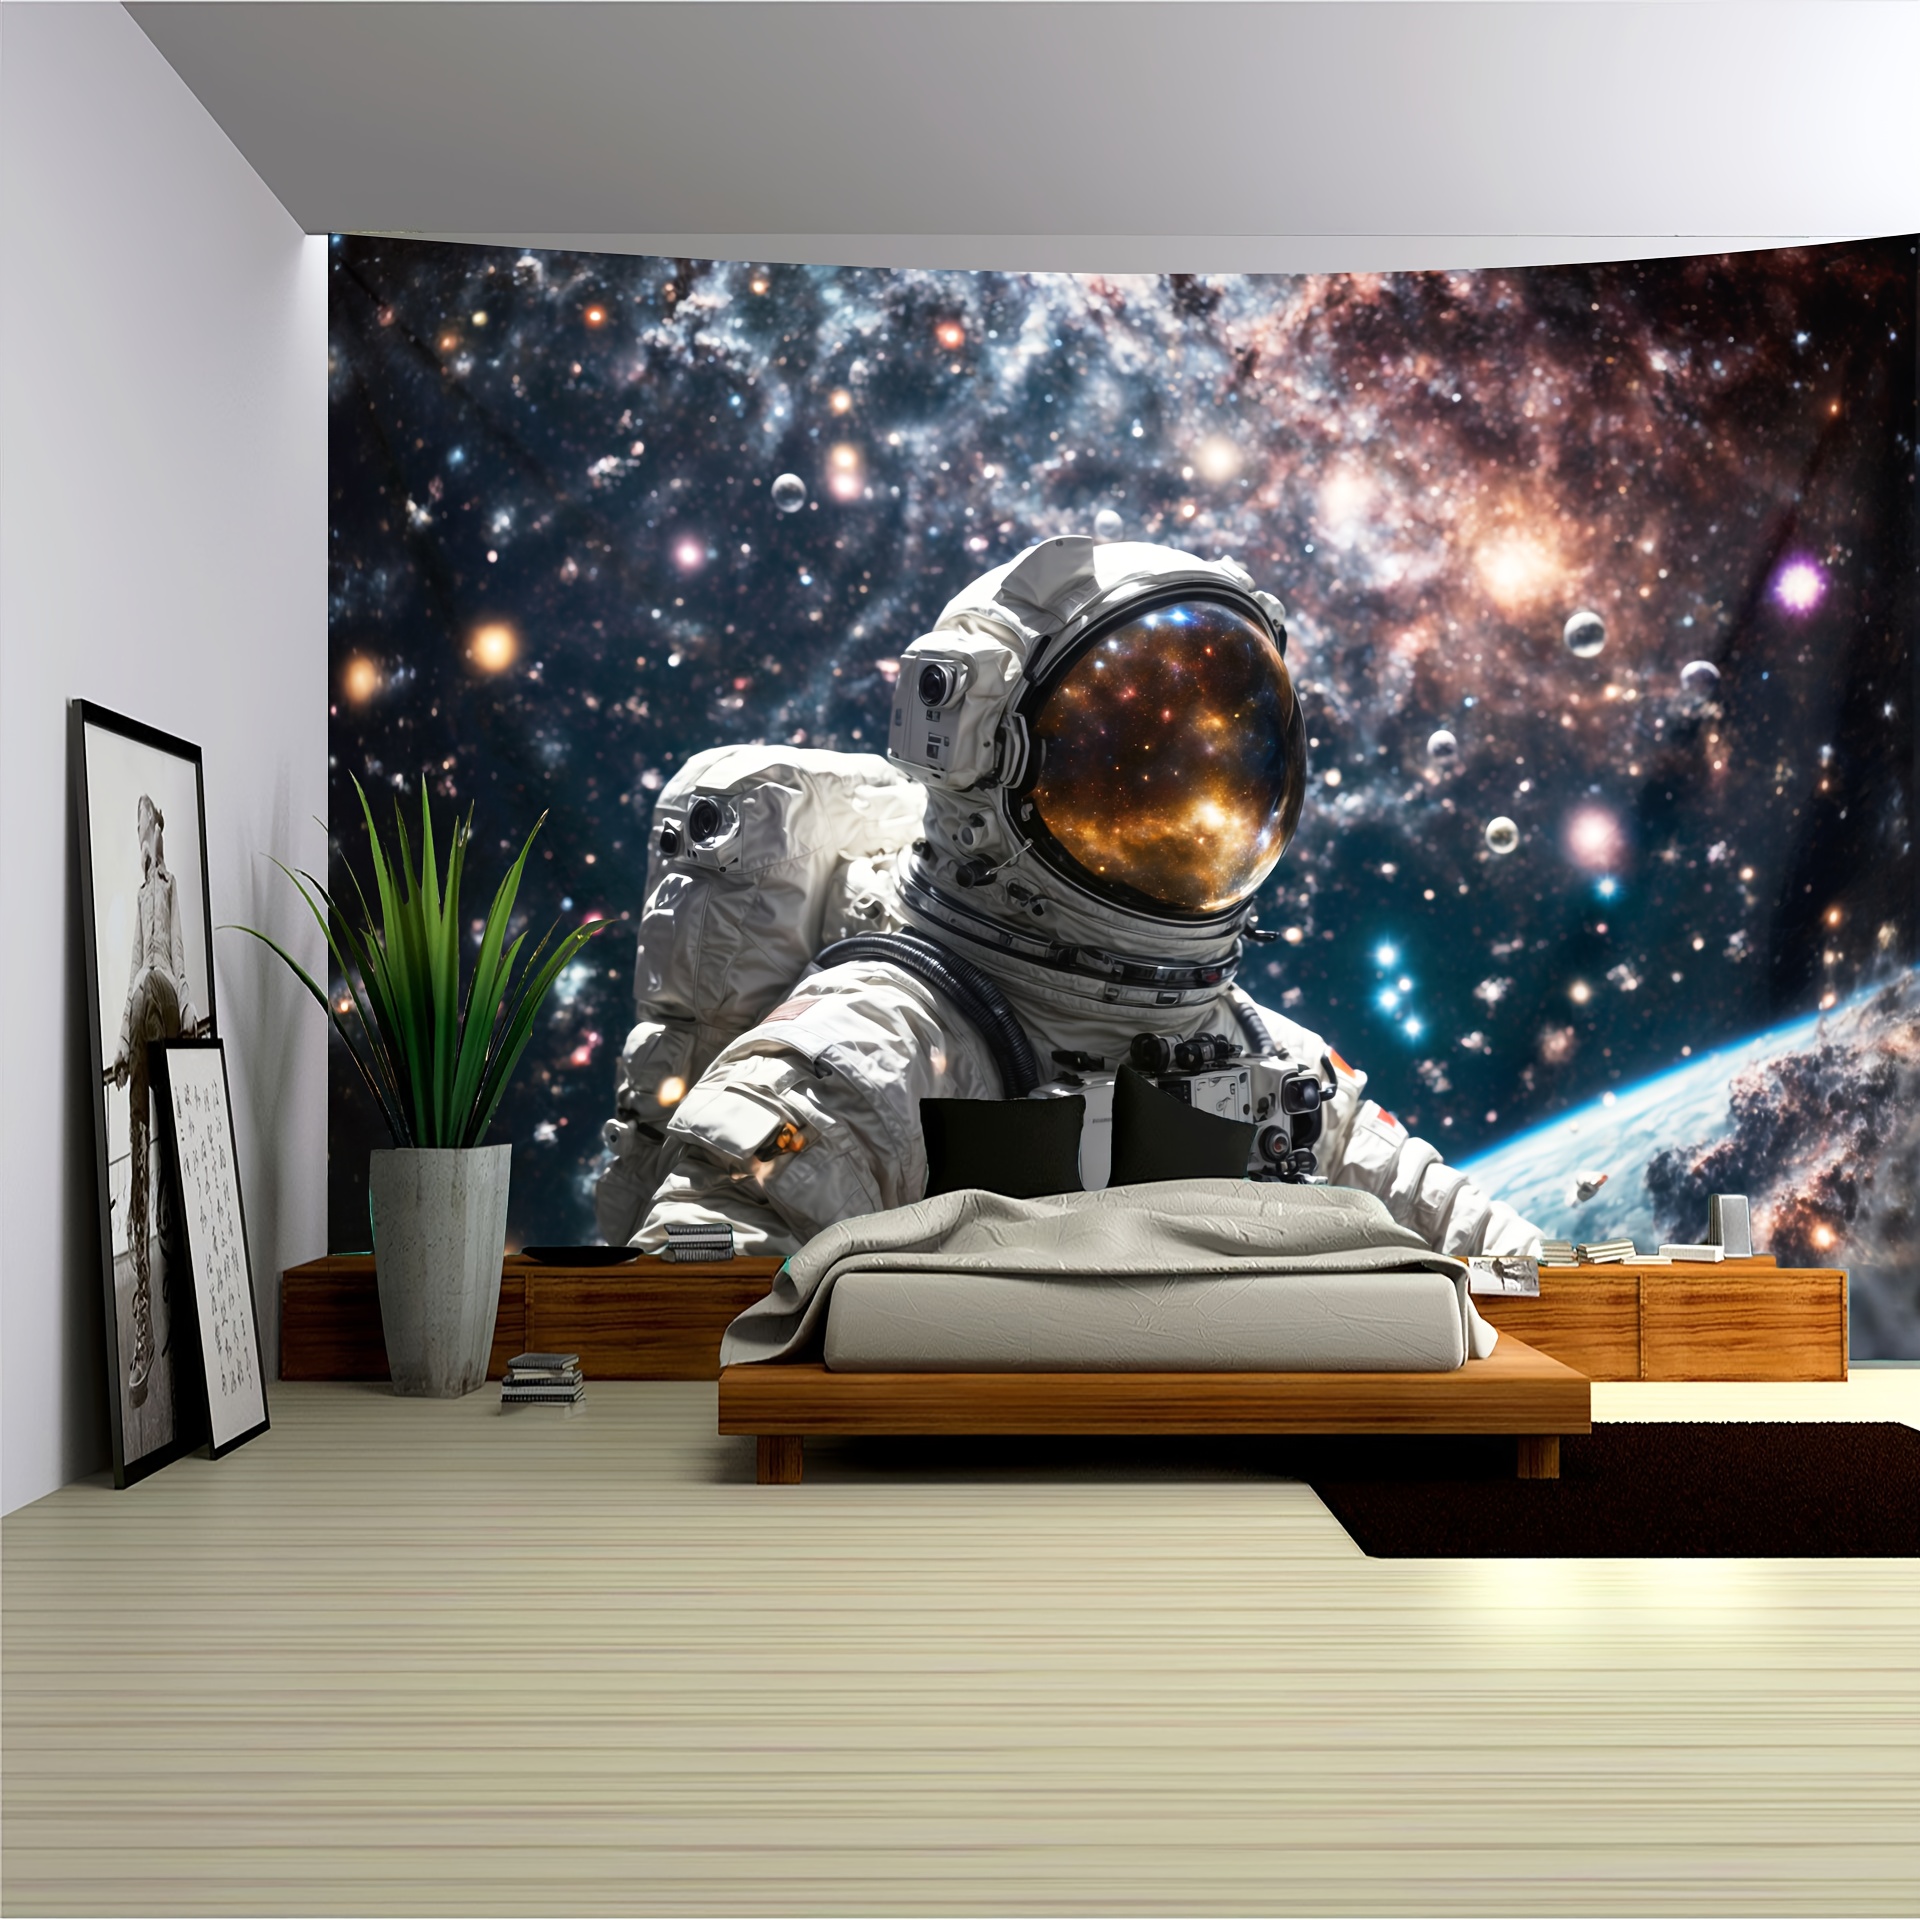 

1pc Astronaut Tapestry, Large Size Photo Background, Bedroom Aesthetic Hanging Tapestry, For Bedroom Office Living Room Home Decor, With Free Accessories